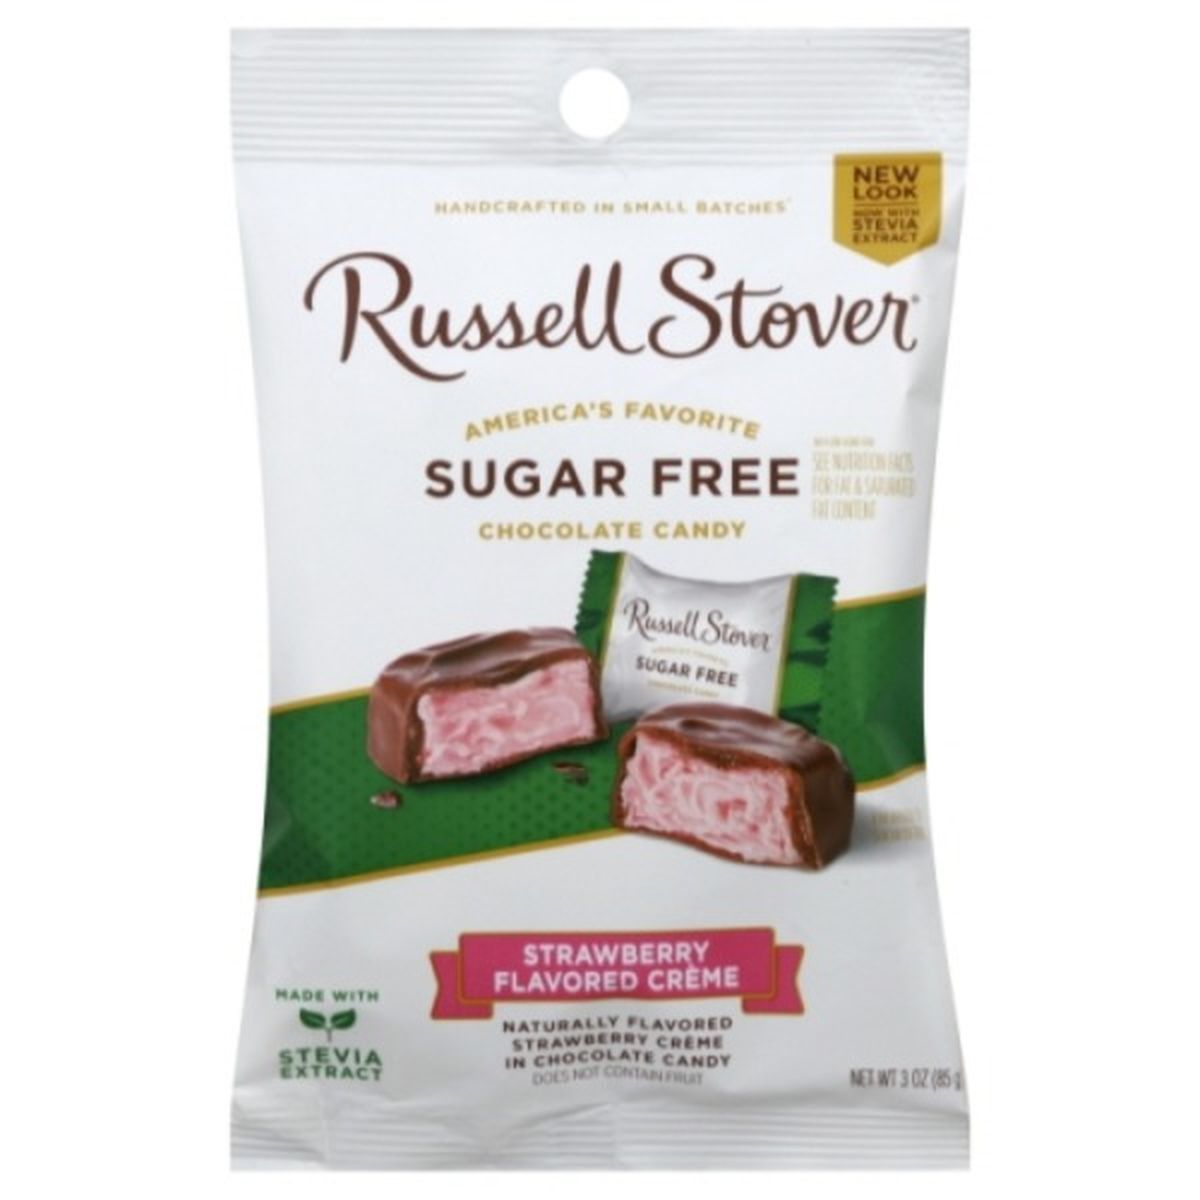 Calories in Russell Stover Chocolate Candy, Sugar Free, Strawberry Flavored Creme